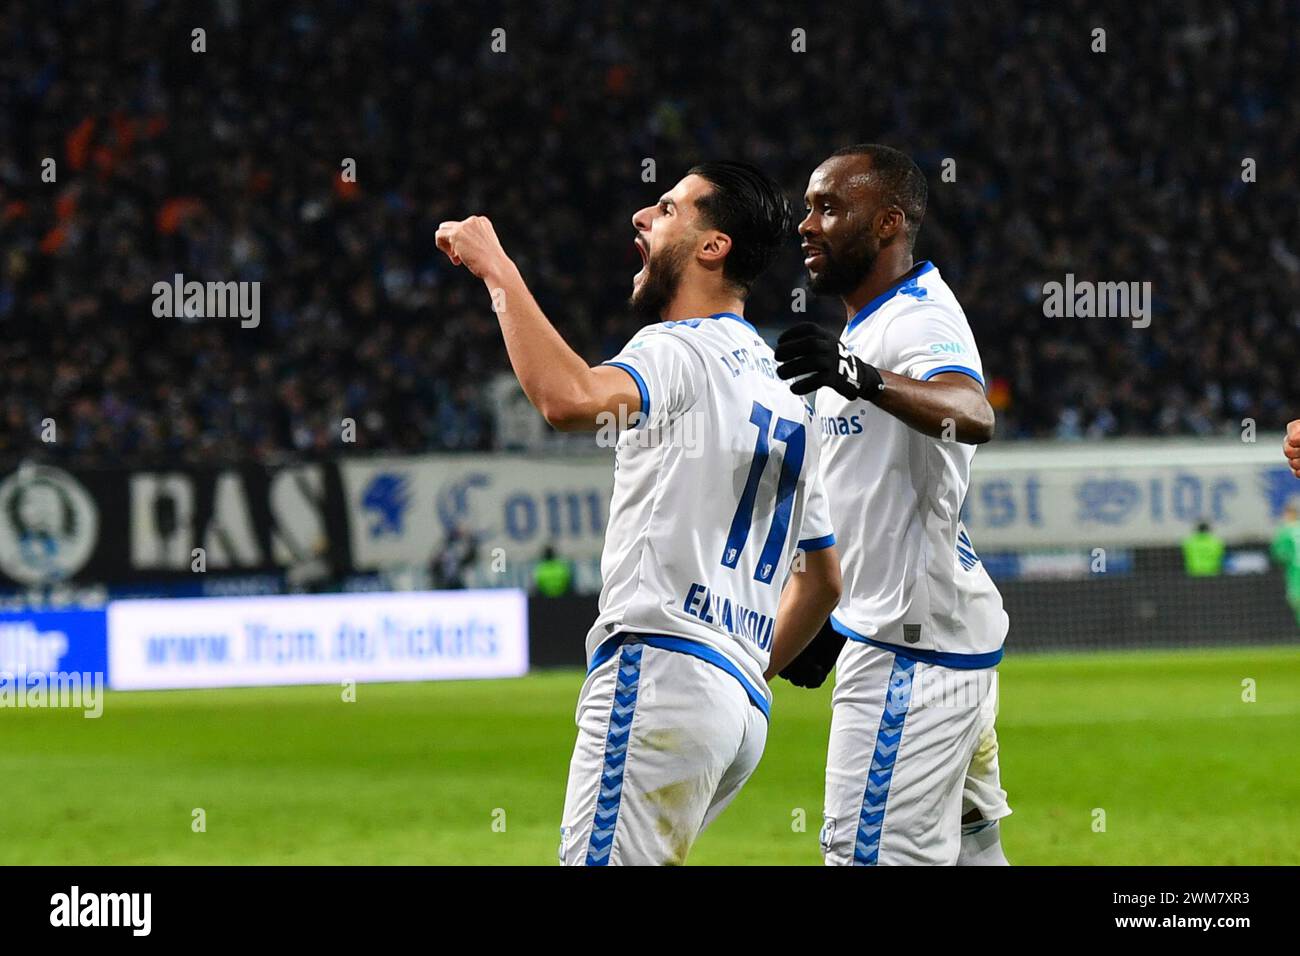 Magdeburg, Germany. 24th Feb, 2024. Soccer: Bundesliga 2, Matchday 23, 1. FC Magdeburg - FC Schalke 04, MDCC-Arena. The Magdeburg players celebrate after the 2:0 goal by Mohammed El Hankouri (l) of Magdeburg. Credit: Christophe Gateau/dpa - IMPORTANT NOTE: In accordance with the regulations of the DFL German Football League and the DFB German Football Association, it is prohibited to utilize or have utilized photographs taken in the stadium and/or of the match in the form of sequential images and/or video-like photo series./dpa/Alamy Live News Stock Photo